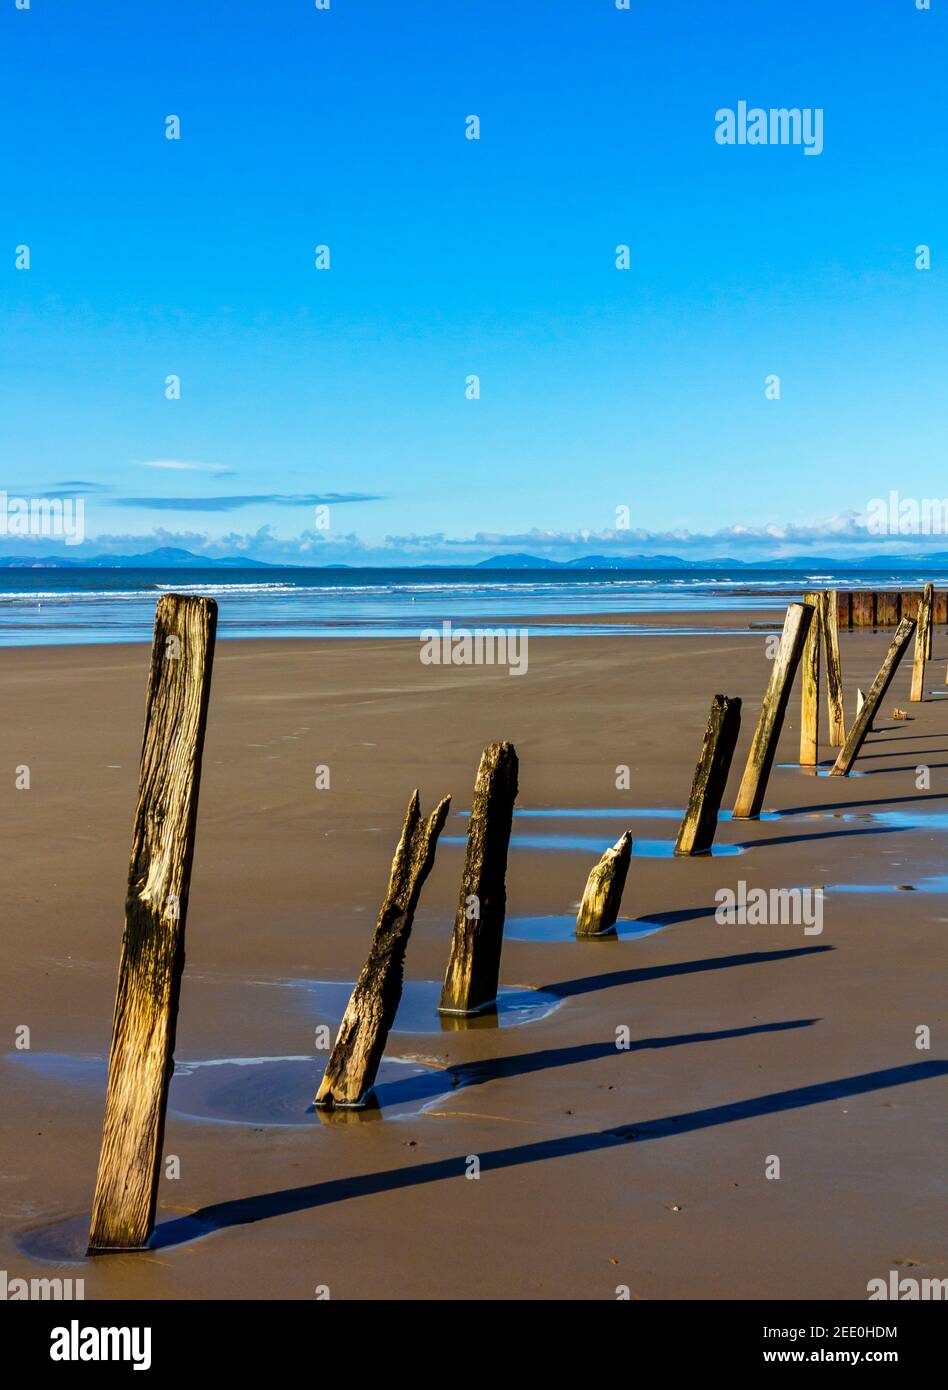 The sandy beach at Barmouth Bay or Abermaw in Gwynedd on the north west coast of Wales with the mountains of Snowdonia in tne distance. Stock Photo